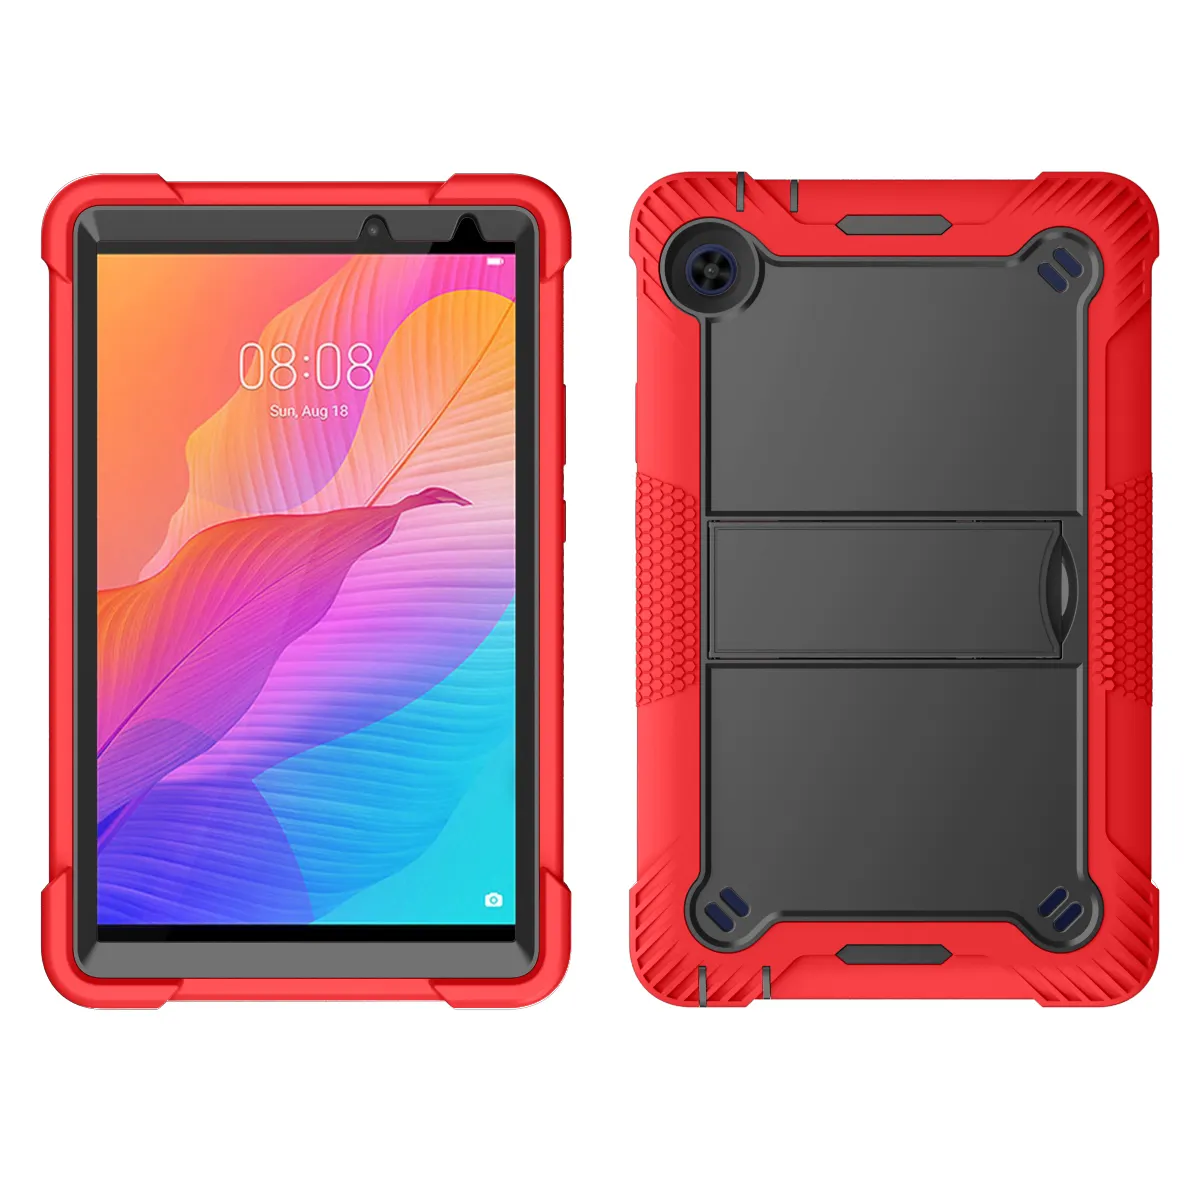 Full-Body Shockproof Rugged Protective Silicone case For Huawei Matepad T8/8 Inch Tablet Cover